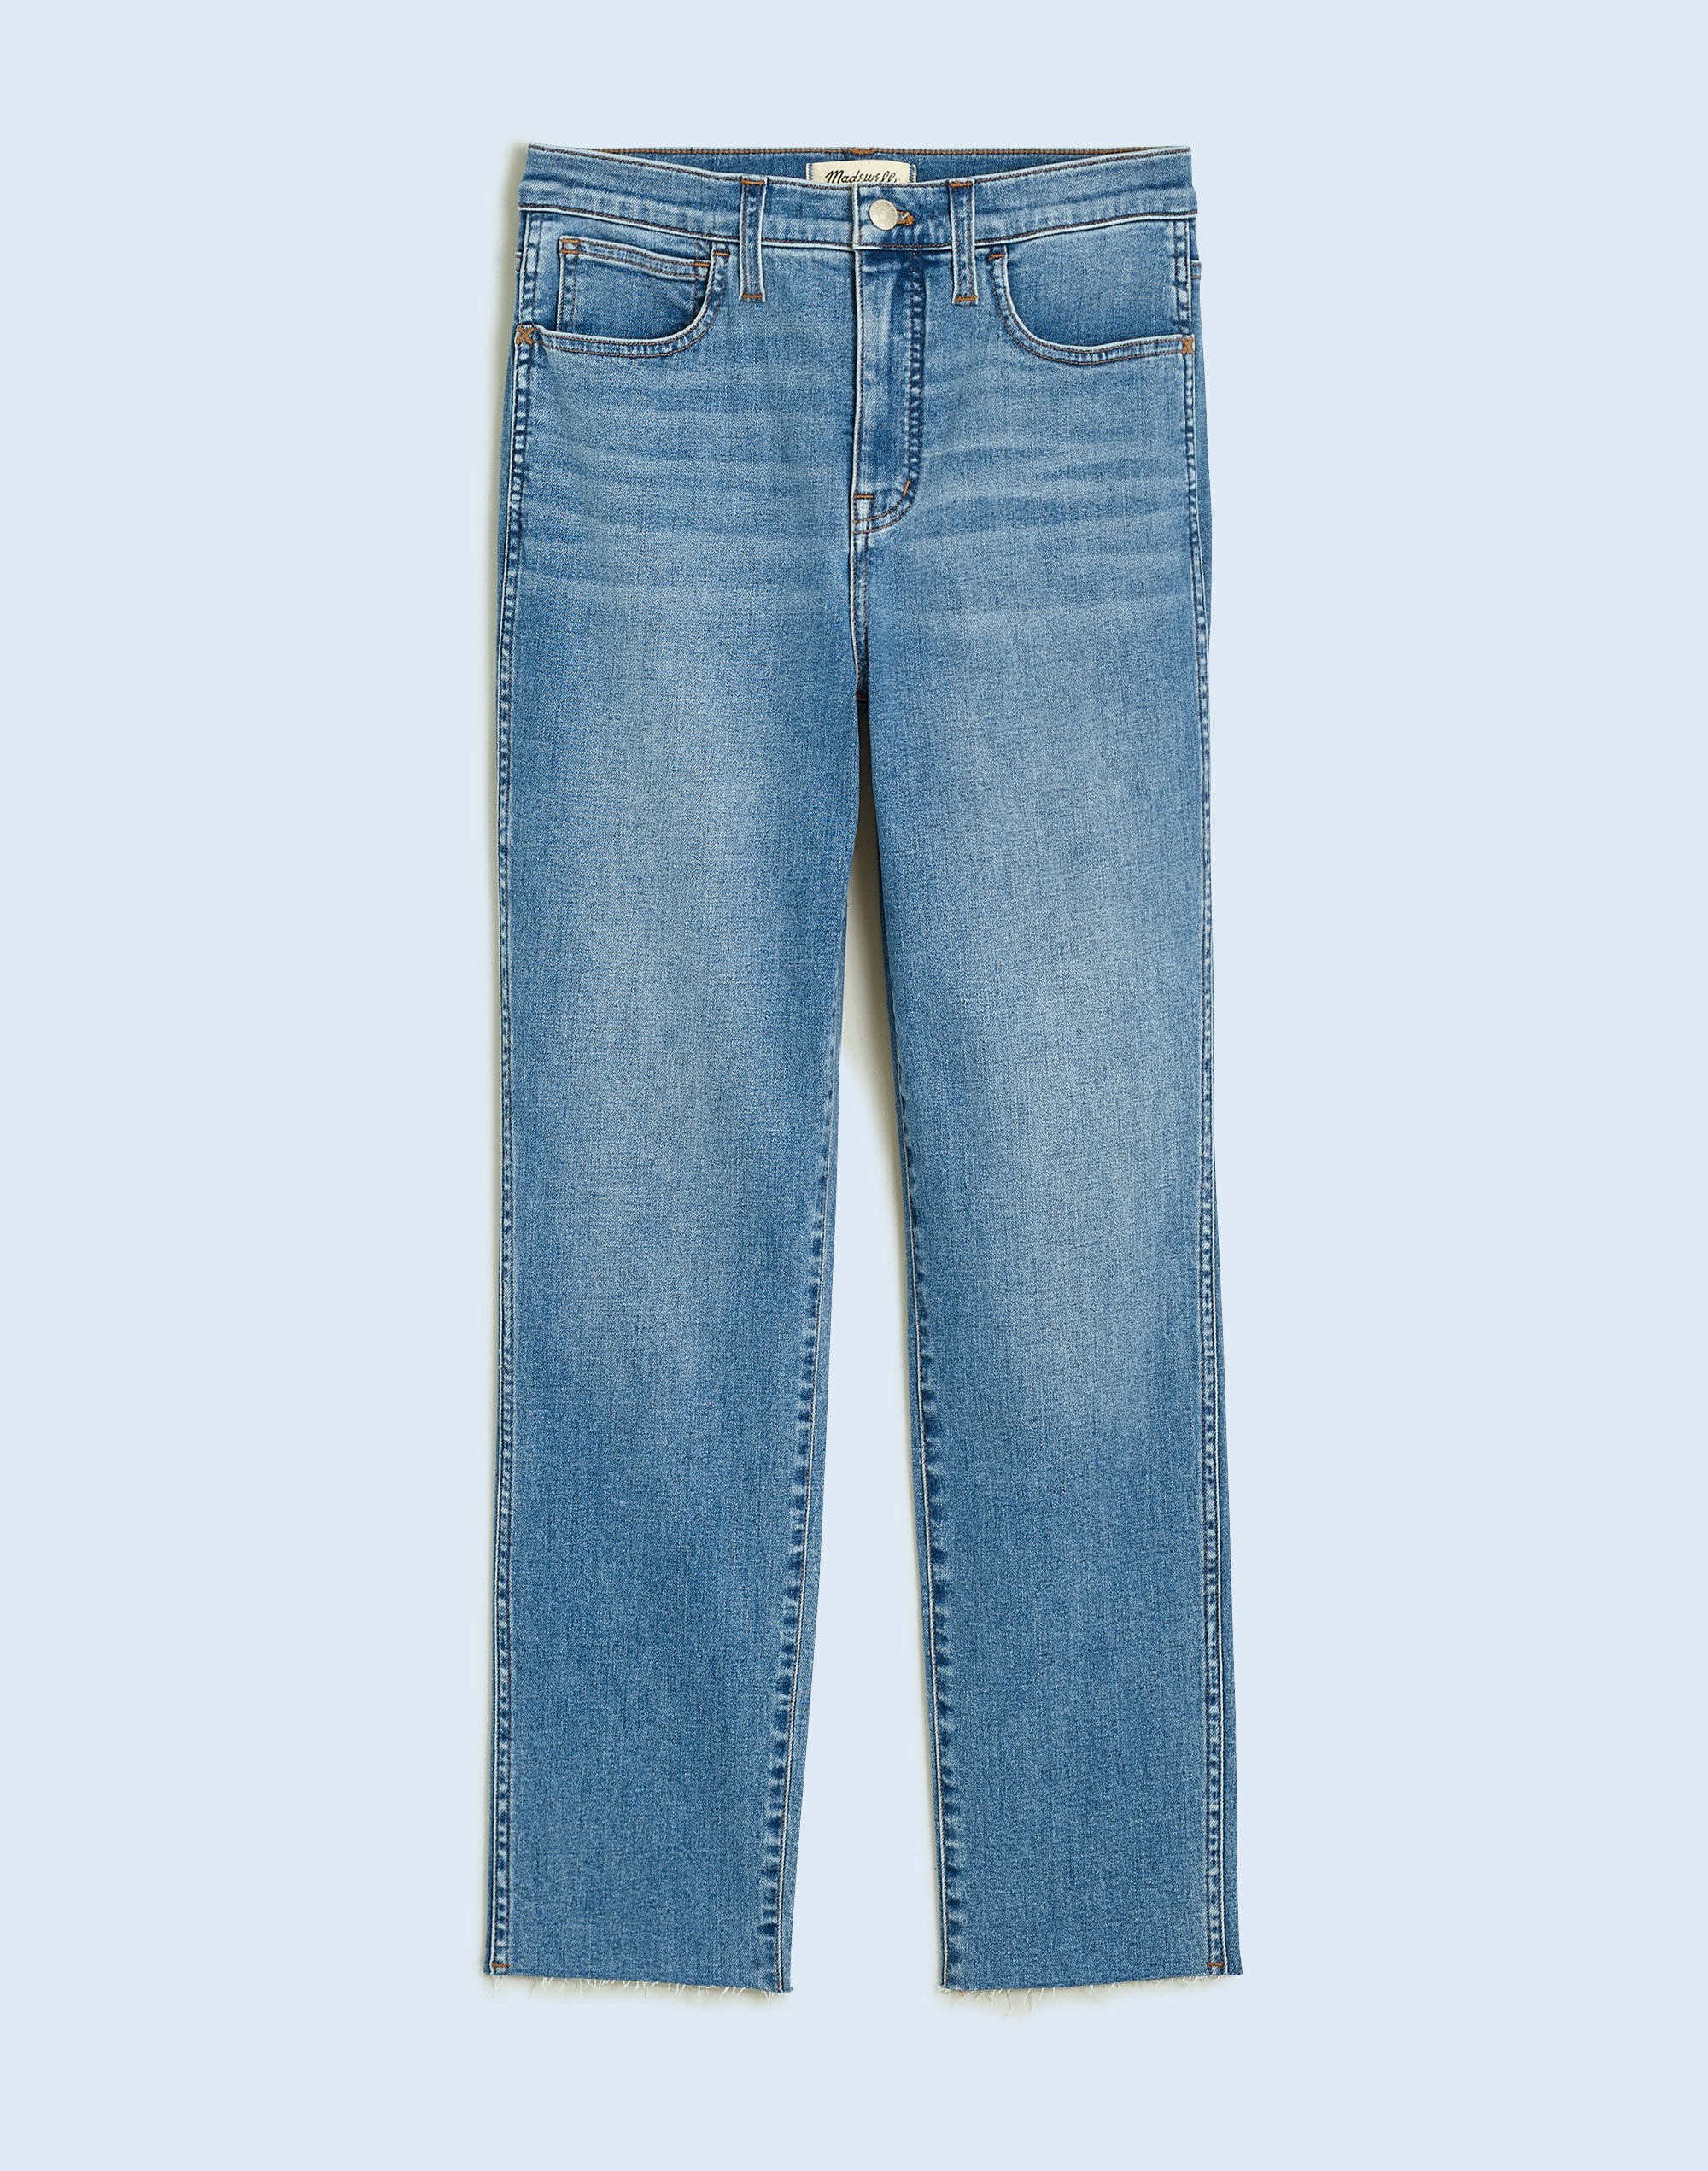 Stovepipe Jeans Mather Wash